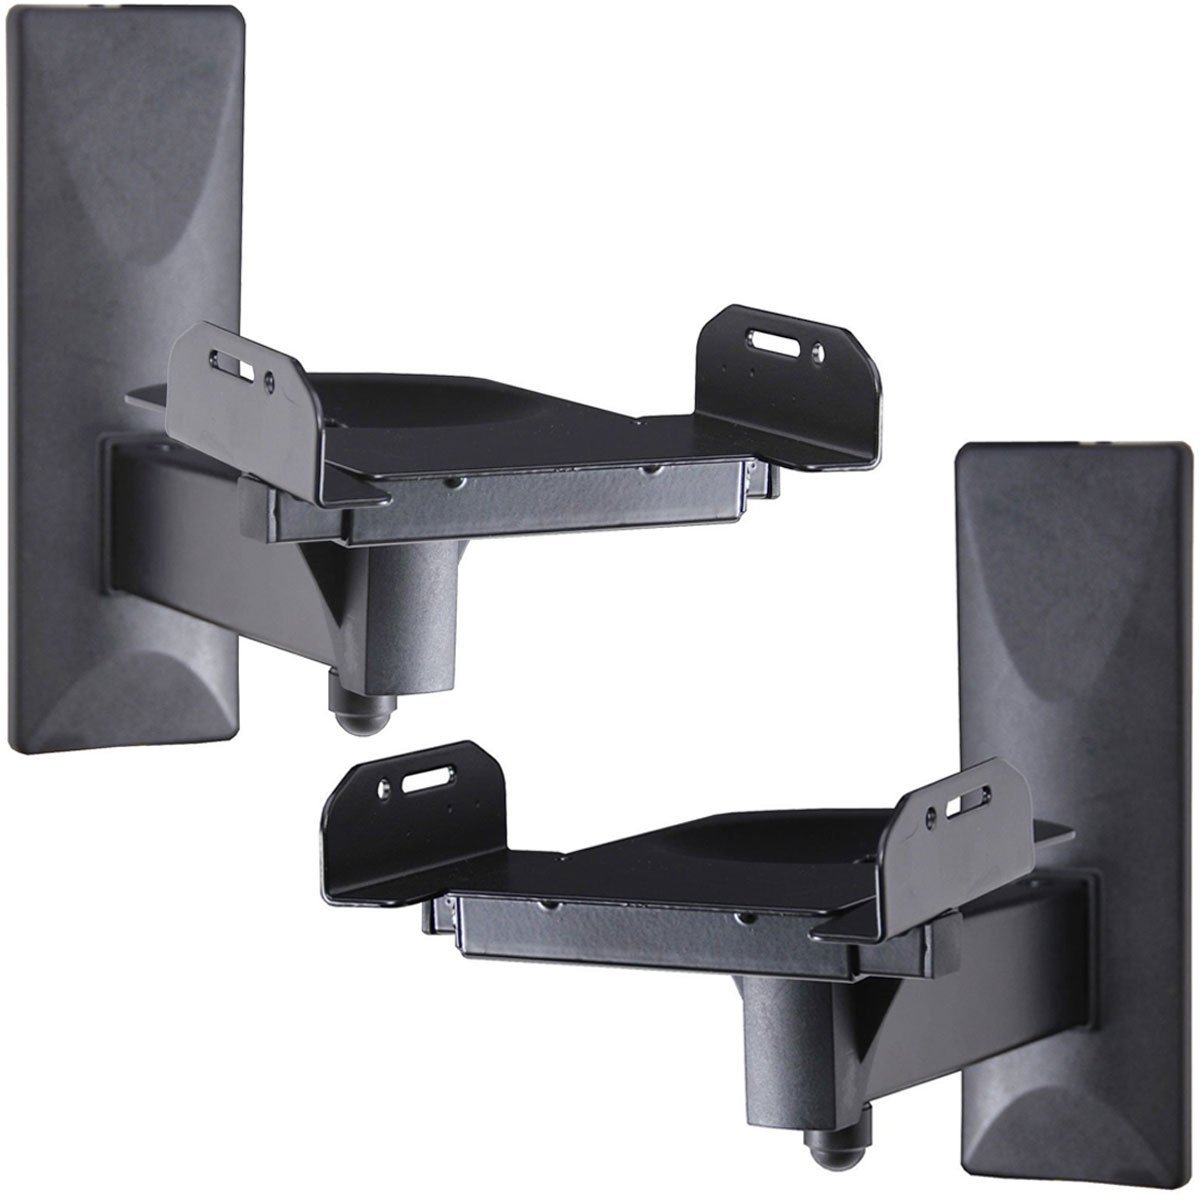 Book Cover VideoSecu One Pair Of Side Clamping Speaker Mounting Bracket With Tilt And Swivel For Large Surrounding Sound Speakers Ms56B 3Lh Black